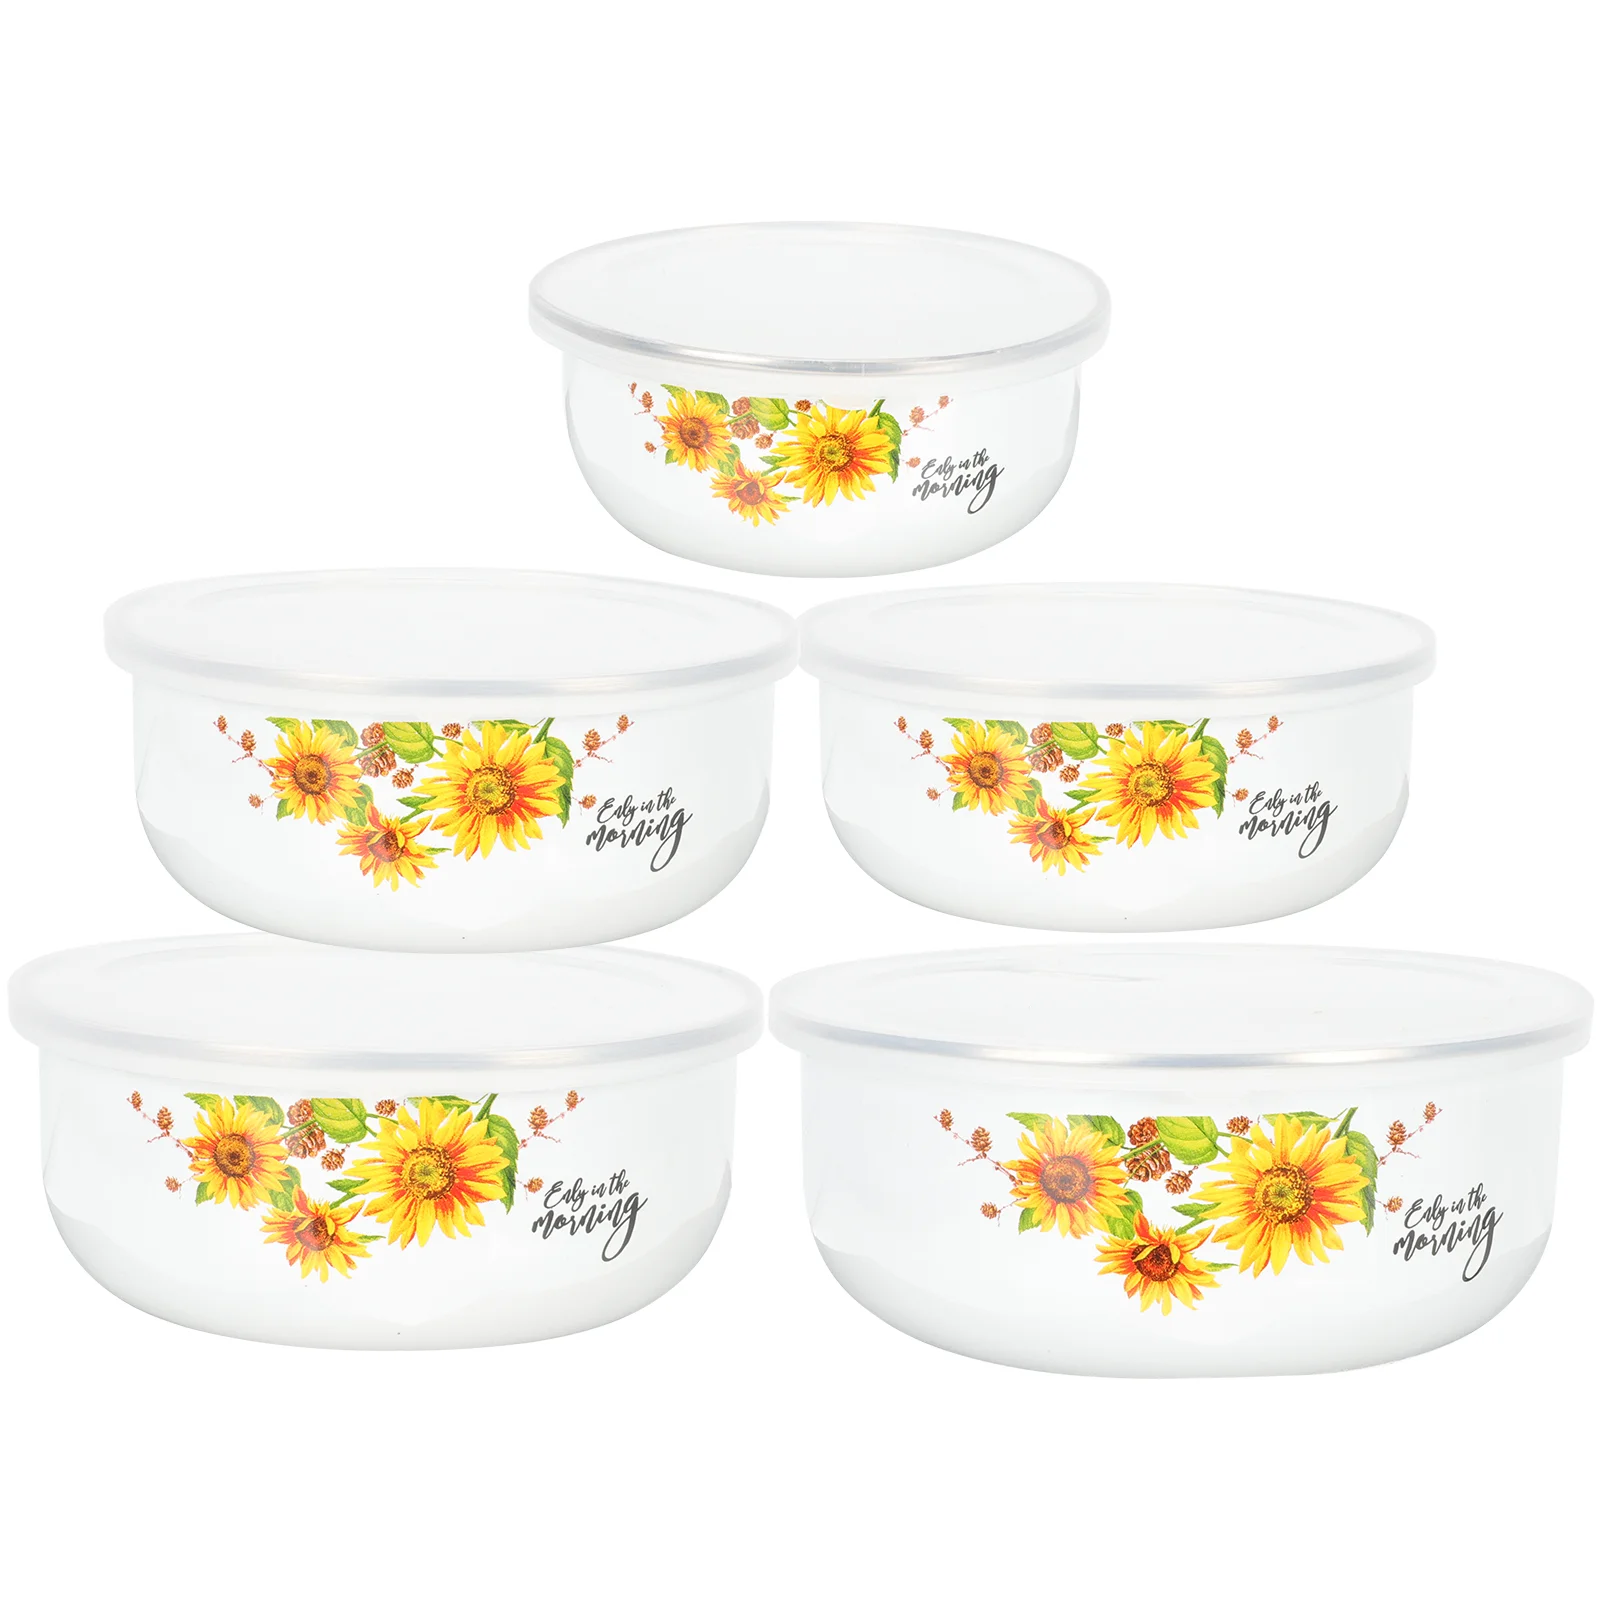 

5 Pcs Enamel Covered Bowl Office Bento Case Salad Bowls Lids Mixing Household Food Container Fresh Keeping Rice Fruit Noodle